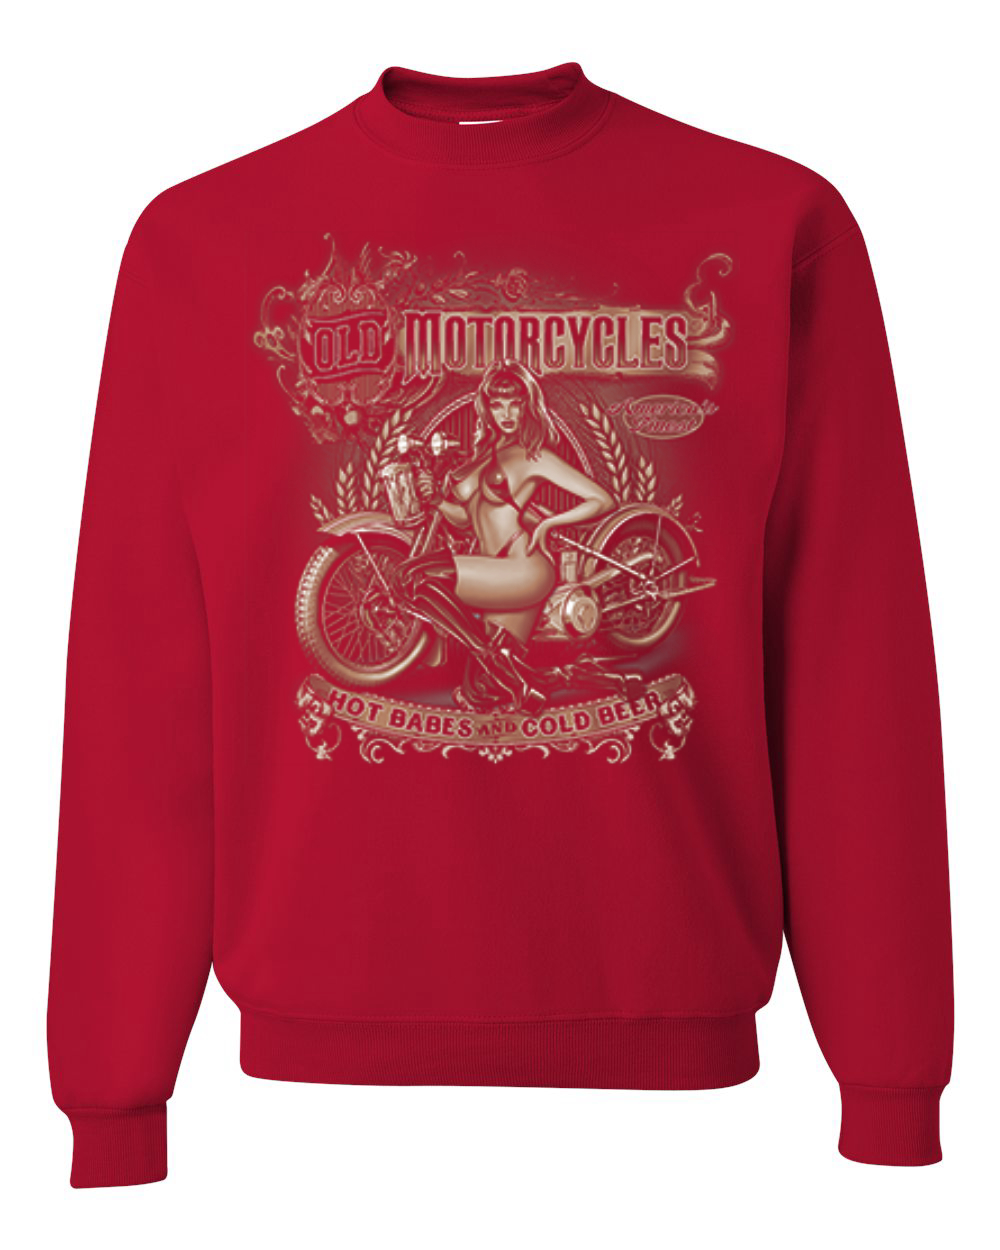 Old Motorcycles Hot Babes And Cold Beer Biker Girl Bikini Hoodie Pullover